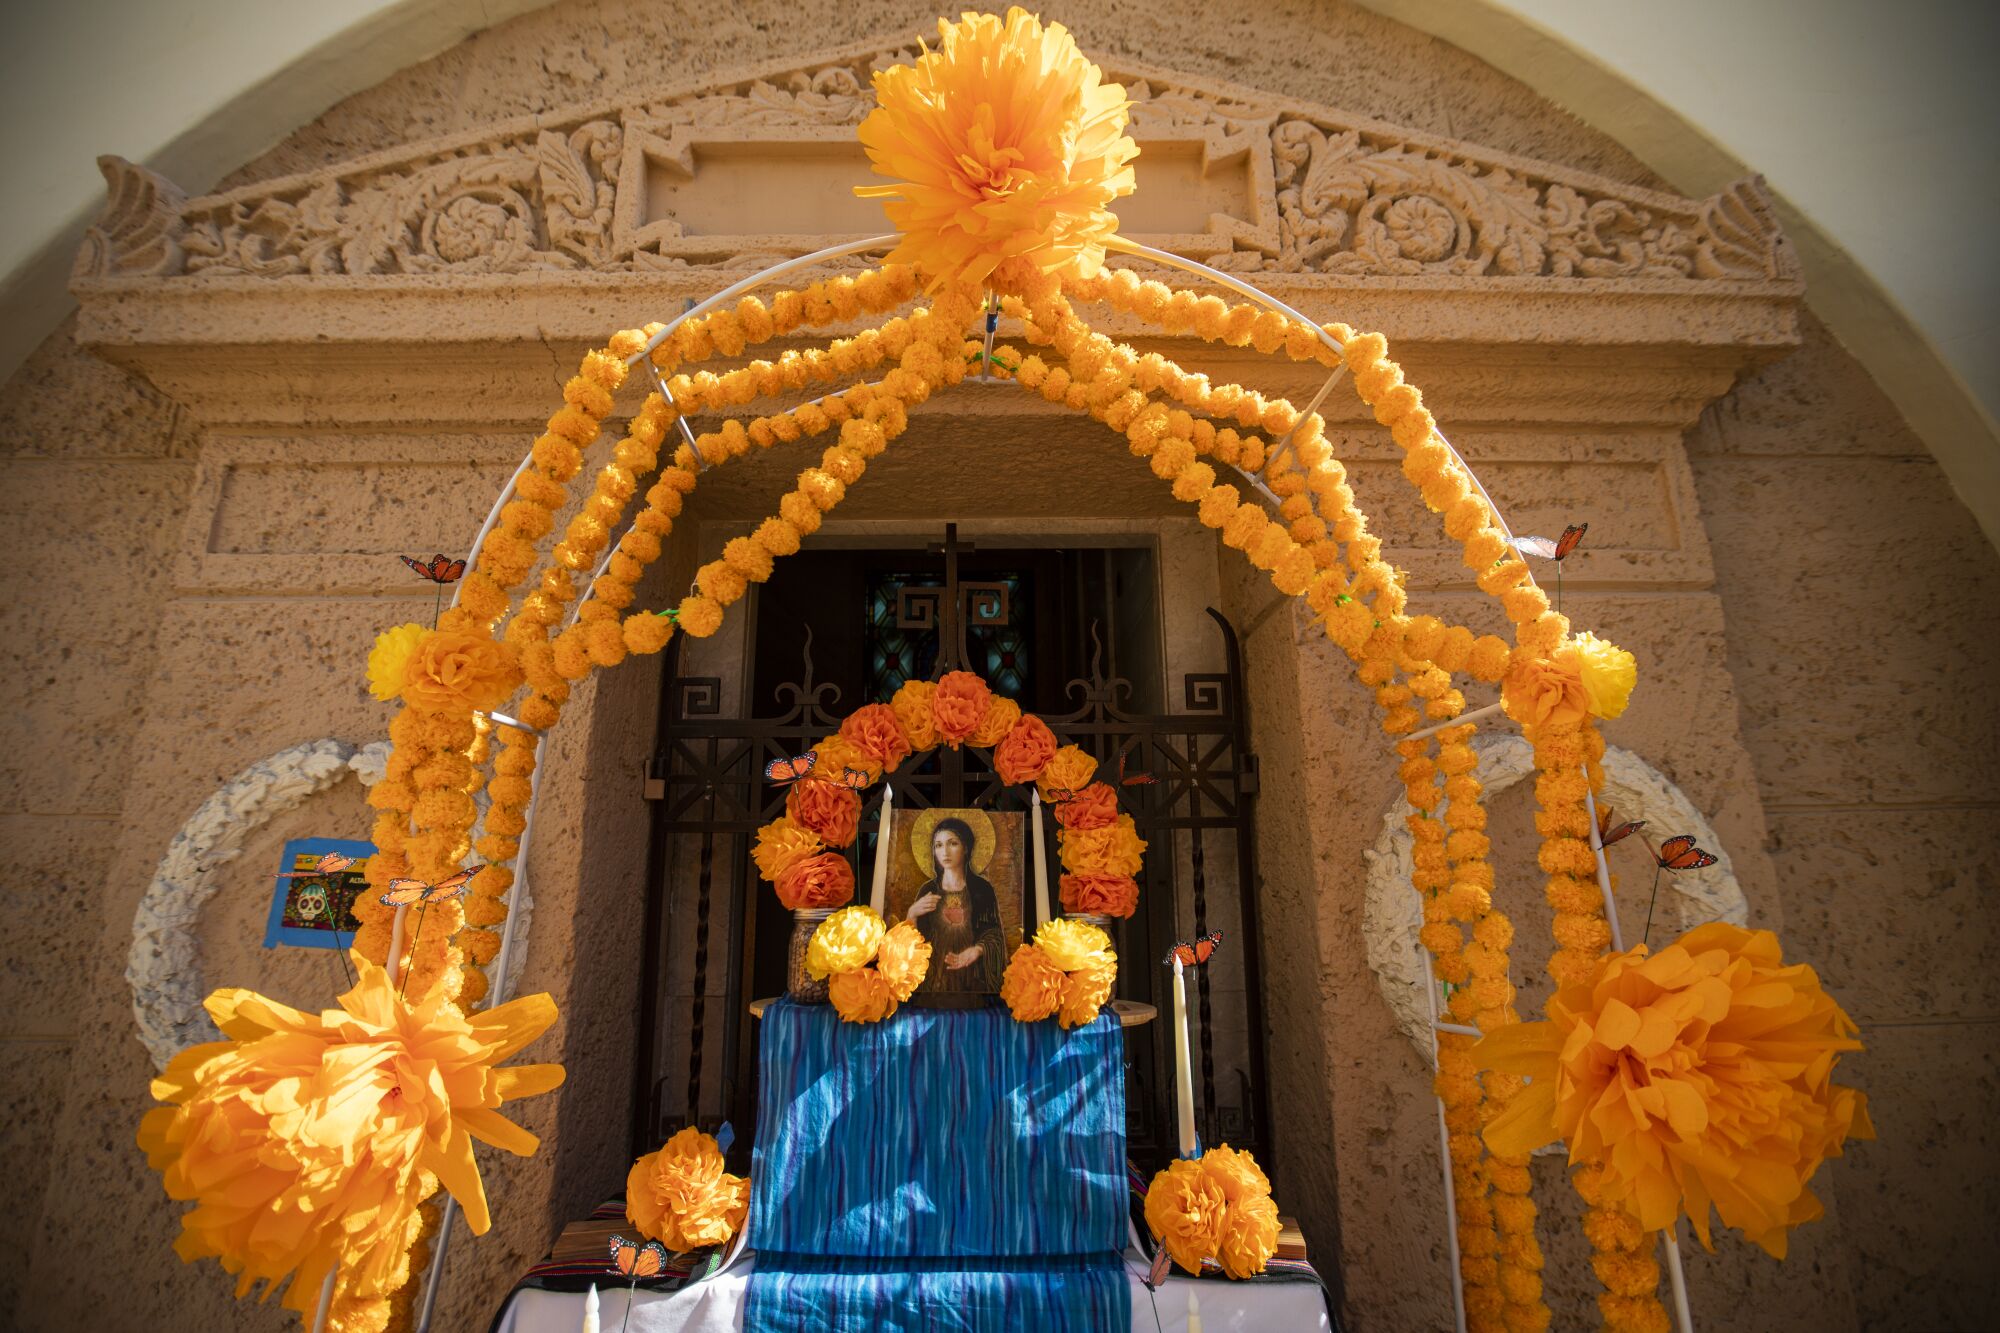 Dia de los Muertos is a Mexican holiday that commemorates loved ones who have died.